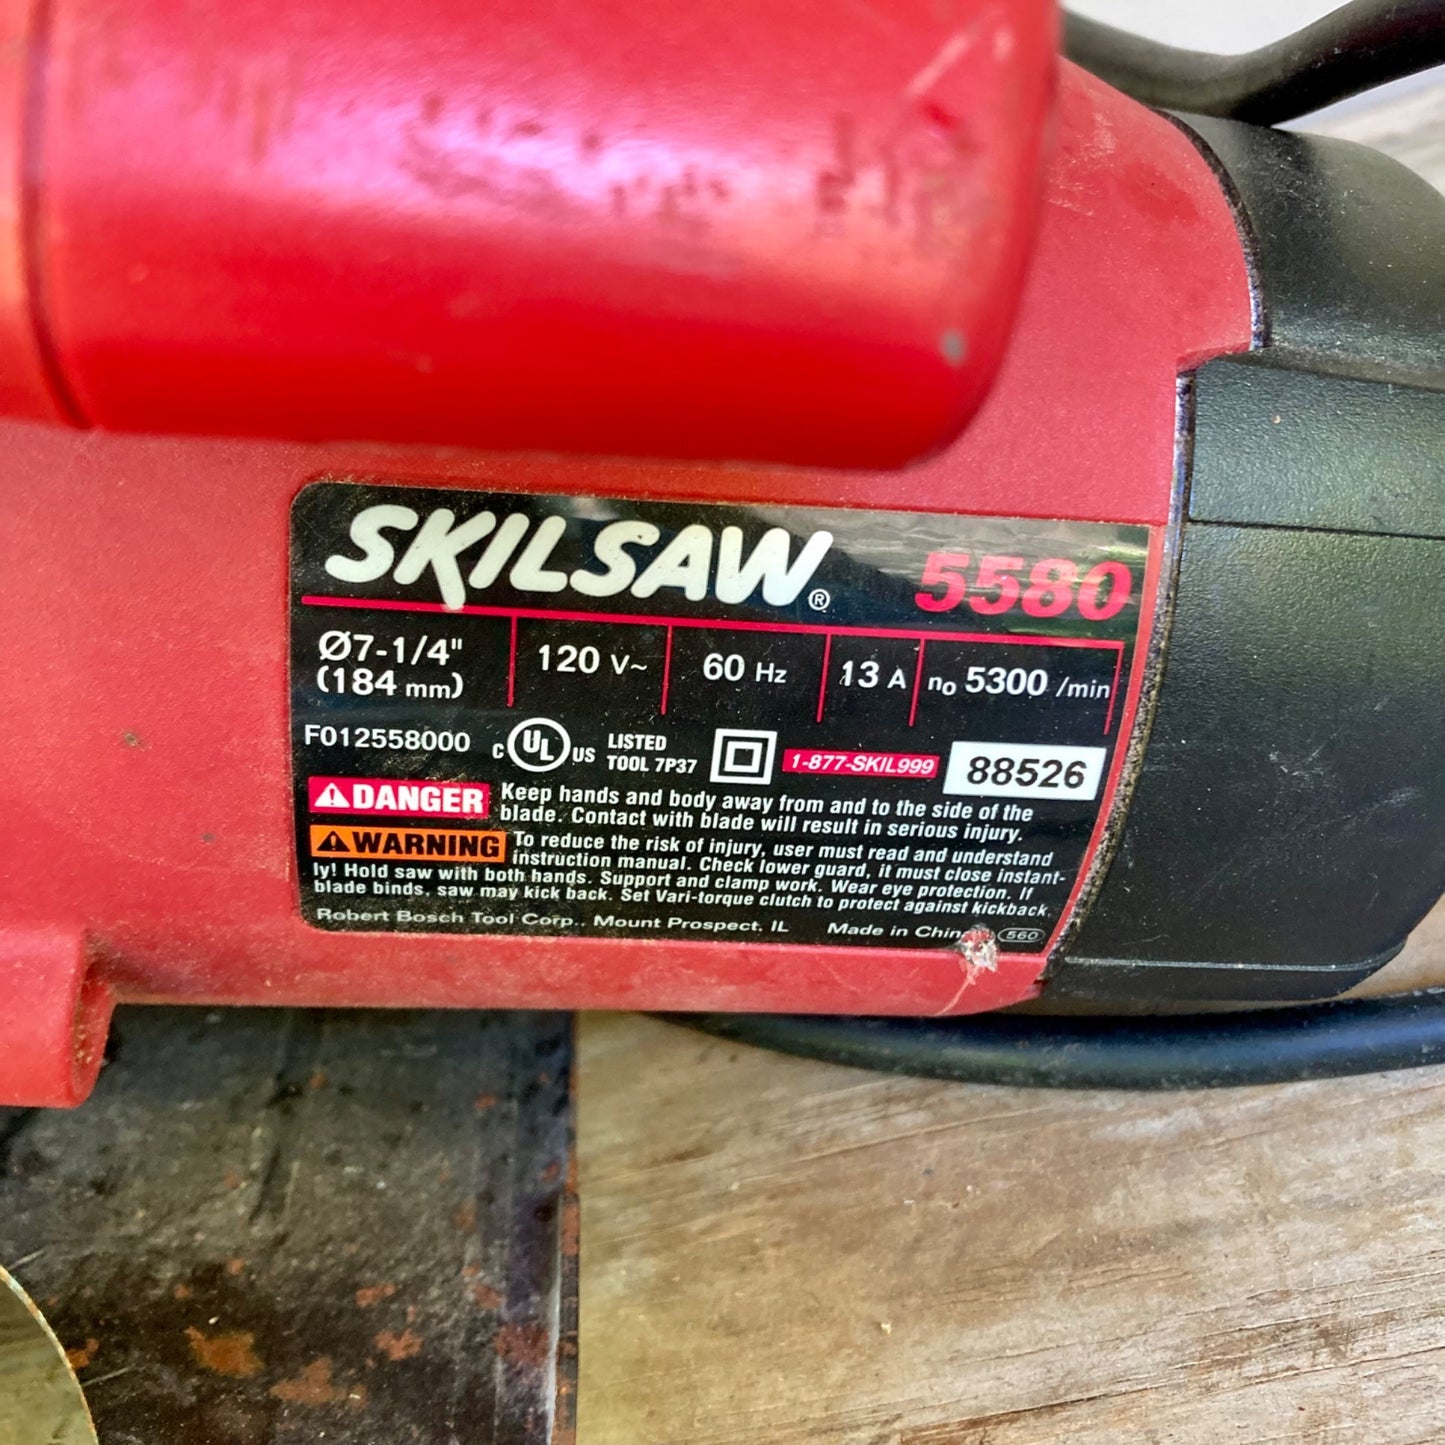 Skilsaw 5580 Circular Saw 7-1/4" Corded Electric TESTED & WORKS!